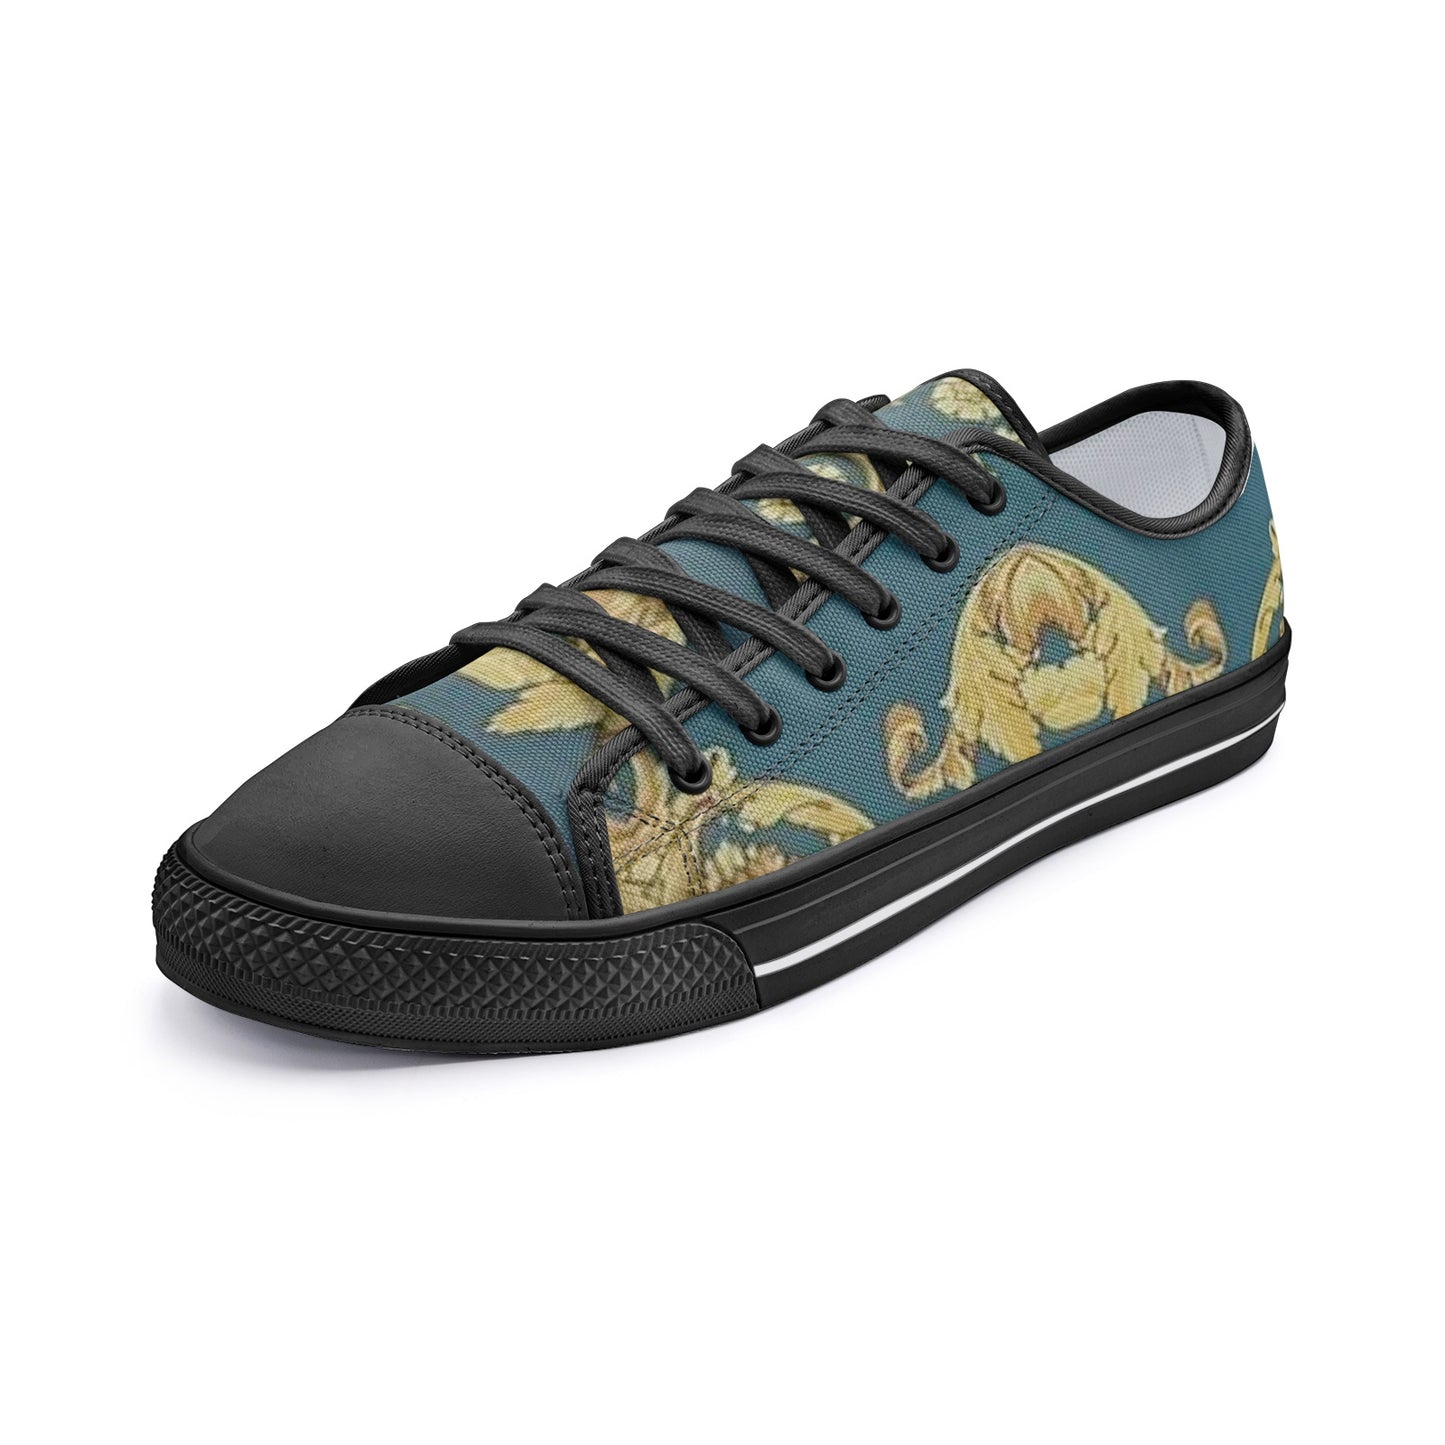 FZ African Print Unisex Low Top Canvas Shoes